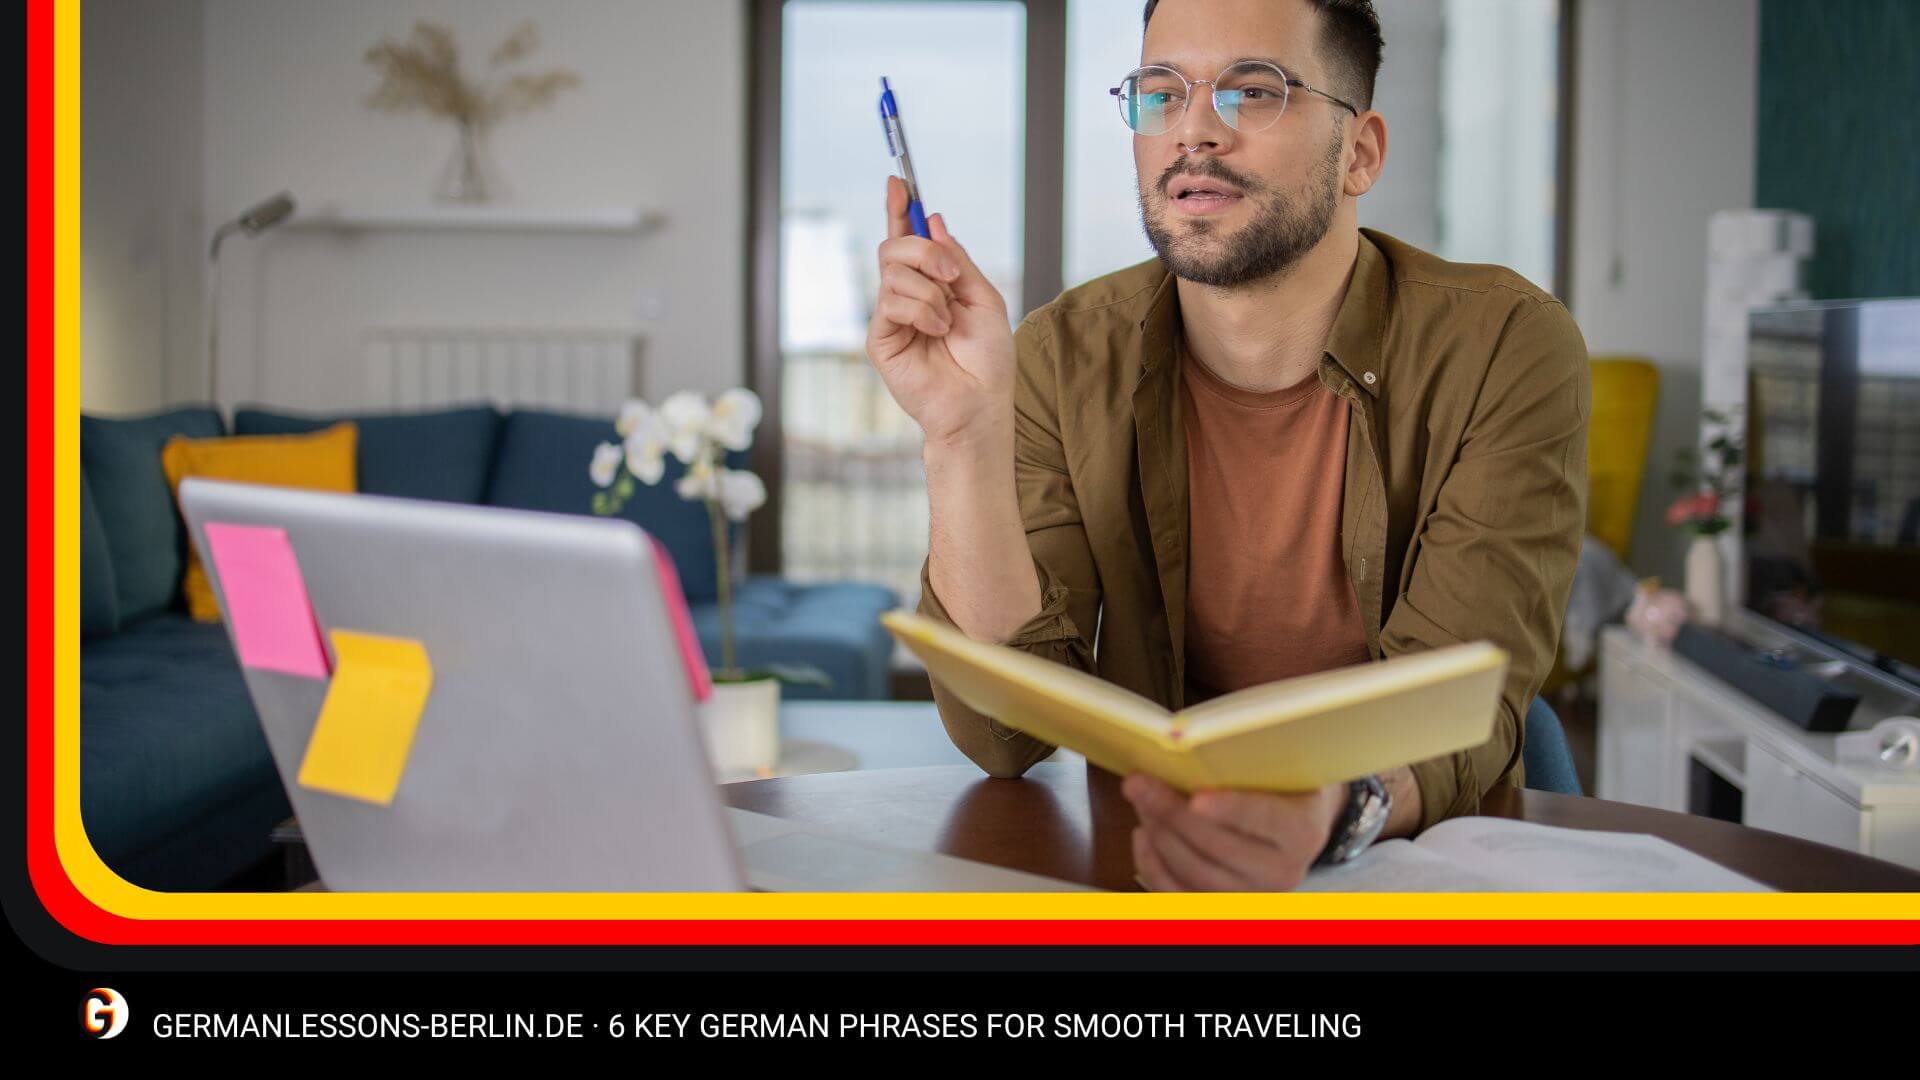 6 Key German Phrases for Smooth Traveling